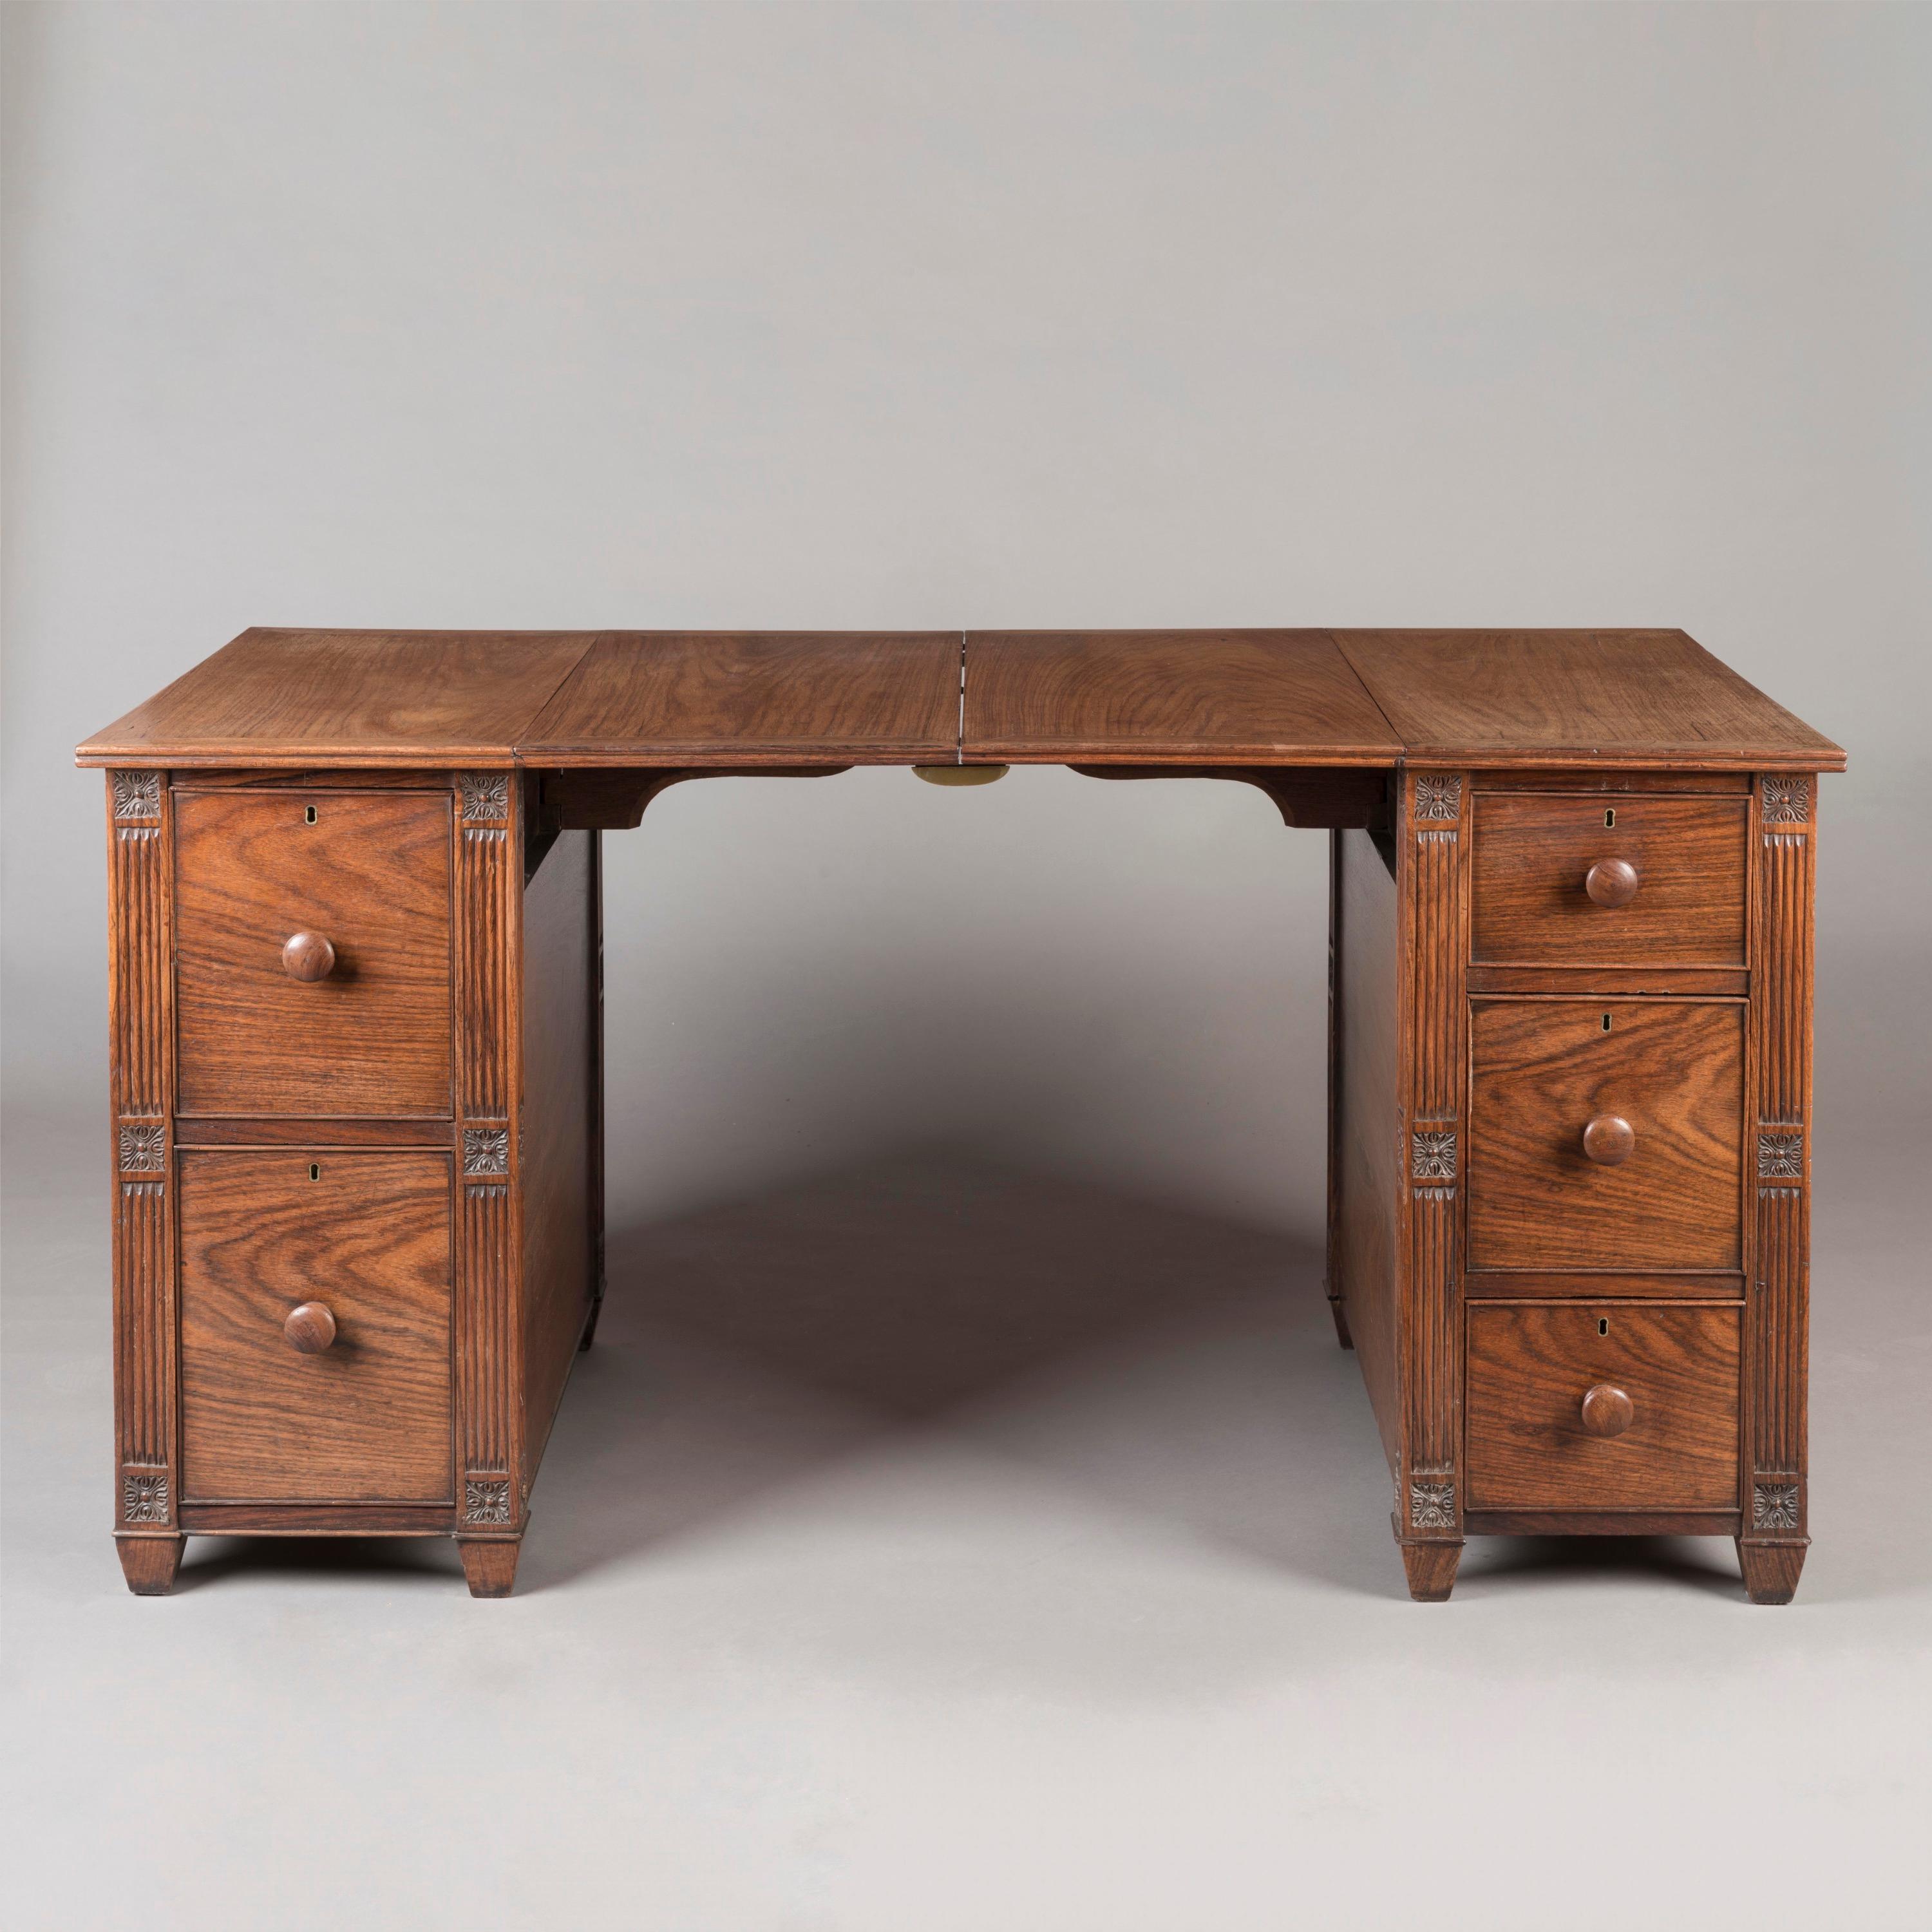 An Ingenious 'Collapsible' Campaign Pedestal Desk

Constructed from rosewood, each pedestal supported on tapering feet, one enclosing two drawers and the other a bank of three drawers, all lockable and with turned knobs, the angles finished as